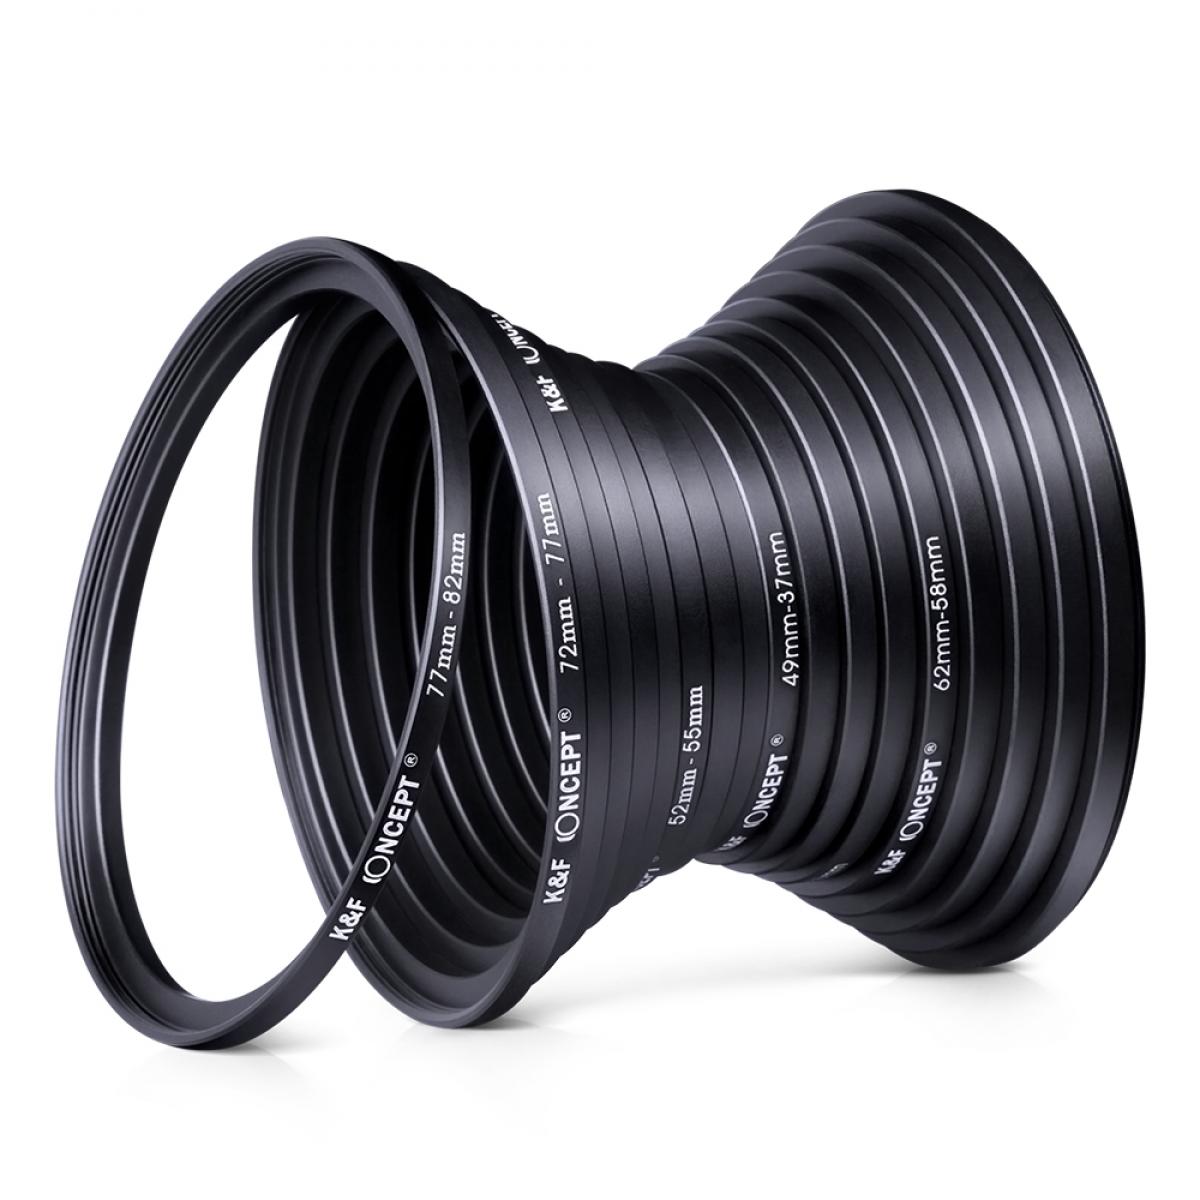 46mm to 77mm Step Up Ring for Camera Lenses and Filter,Metal Filters Step-Up Ring Adapter,The Connection 46MM Lens to 77MM Filter Lens Accessory,Cleaning Cloth with Lens